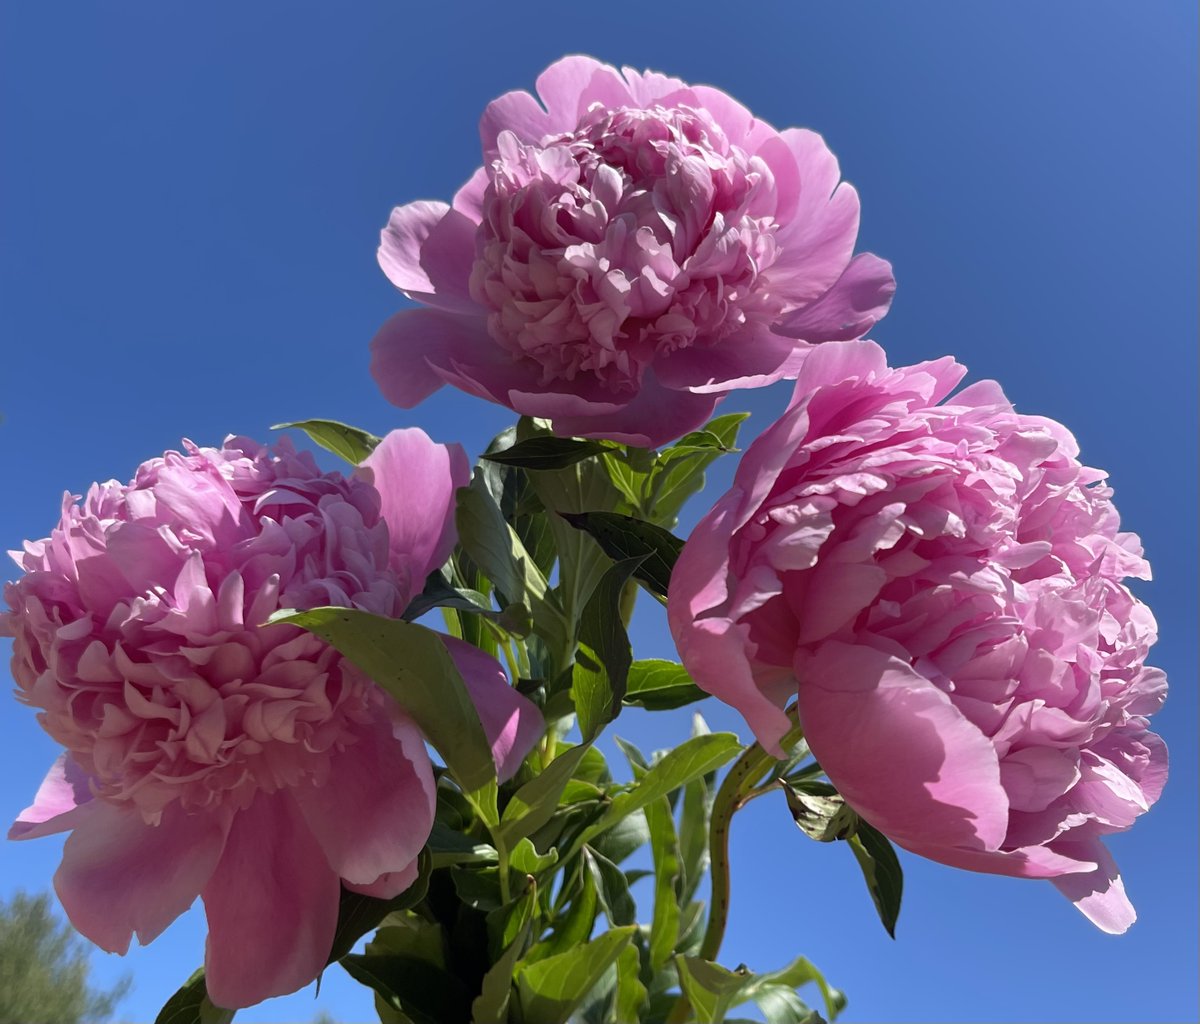 It’s peony season! 🤩 Don’t delay, these beauties move quickly. 💖
.
#steinflorist #steinyourflorist #flowers #florist #flowershop #floristry #shopsmall #shoplocal #smallbusiness #phillyflorist #philadelphiaflorist #NJflorist #peony #peonies #beautiful #peonyseason #springblooms